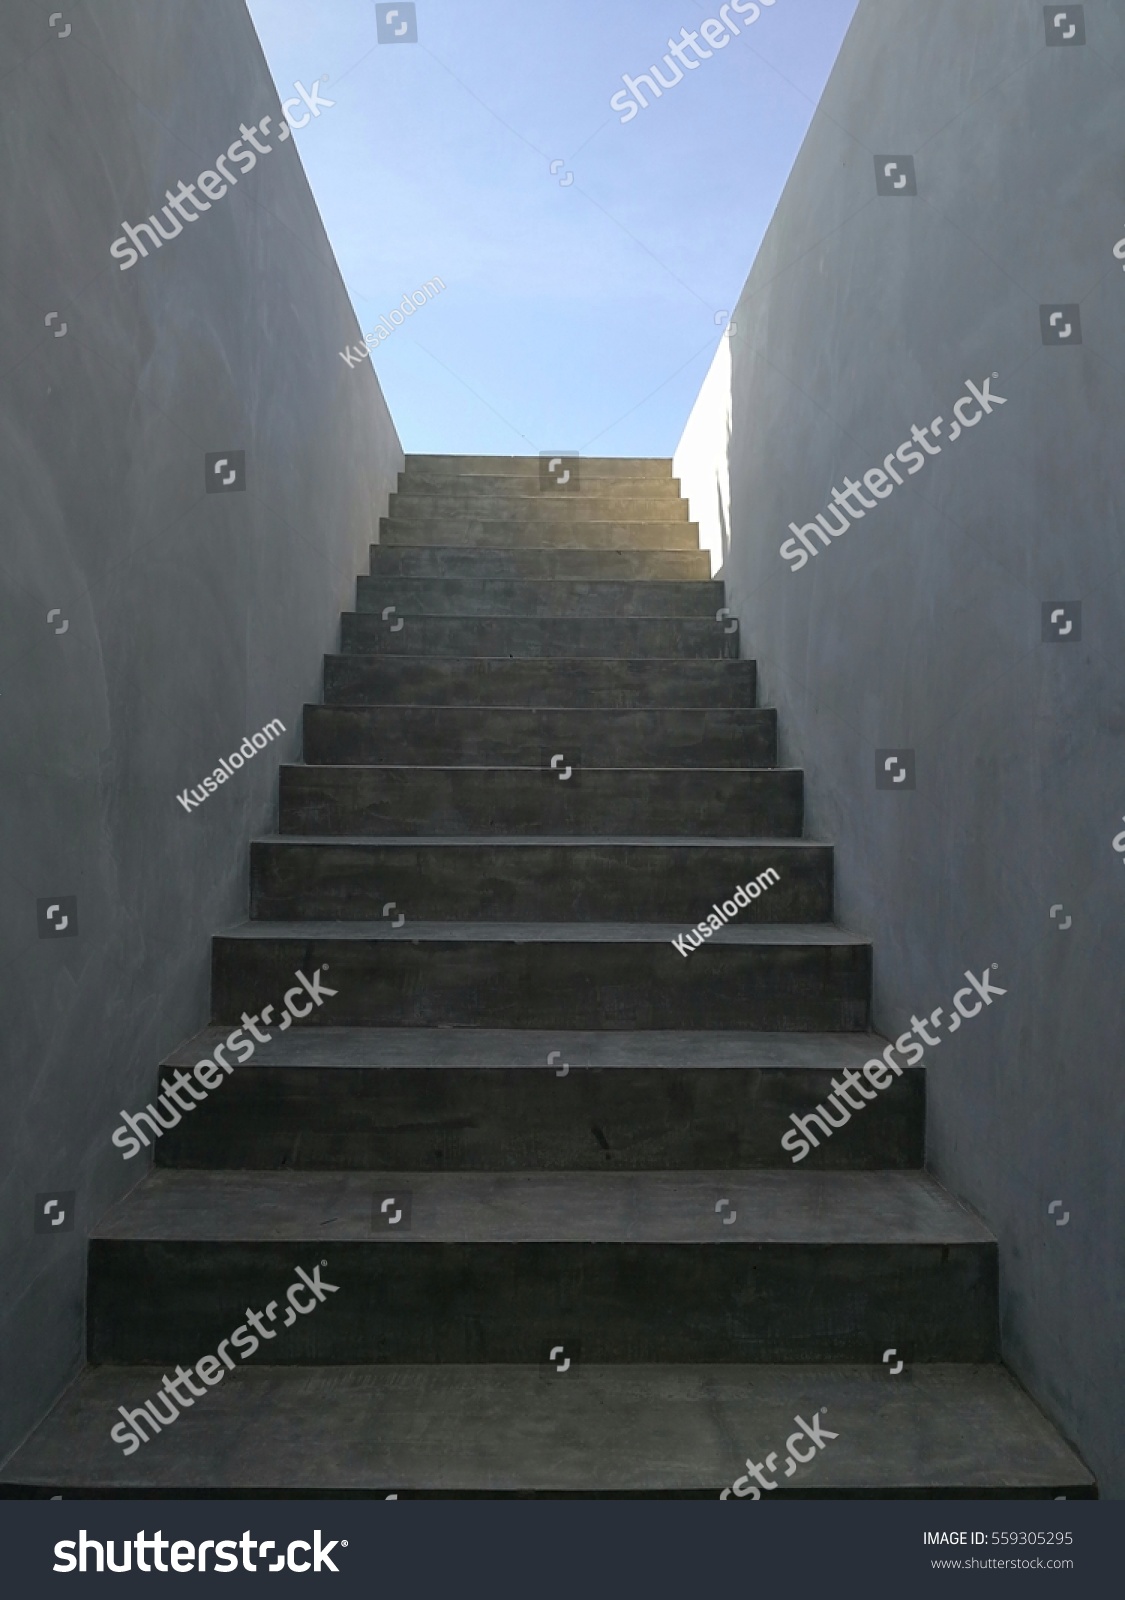 Stairs to the sky.Cement stairs to the deck.Success destination concept #559305295